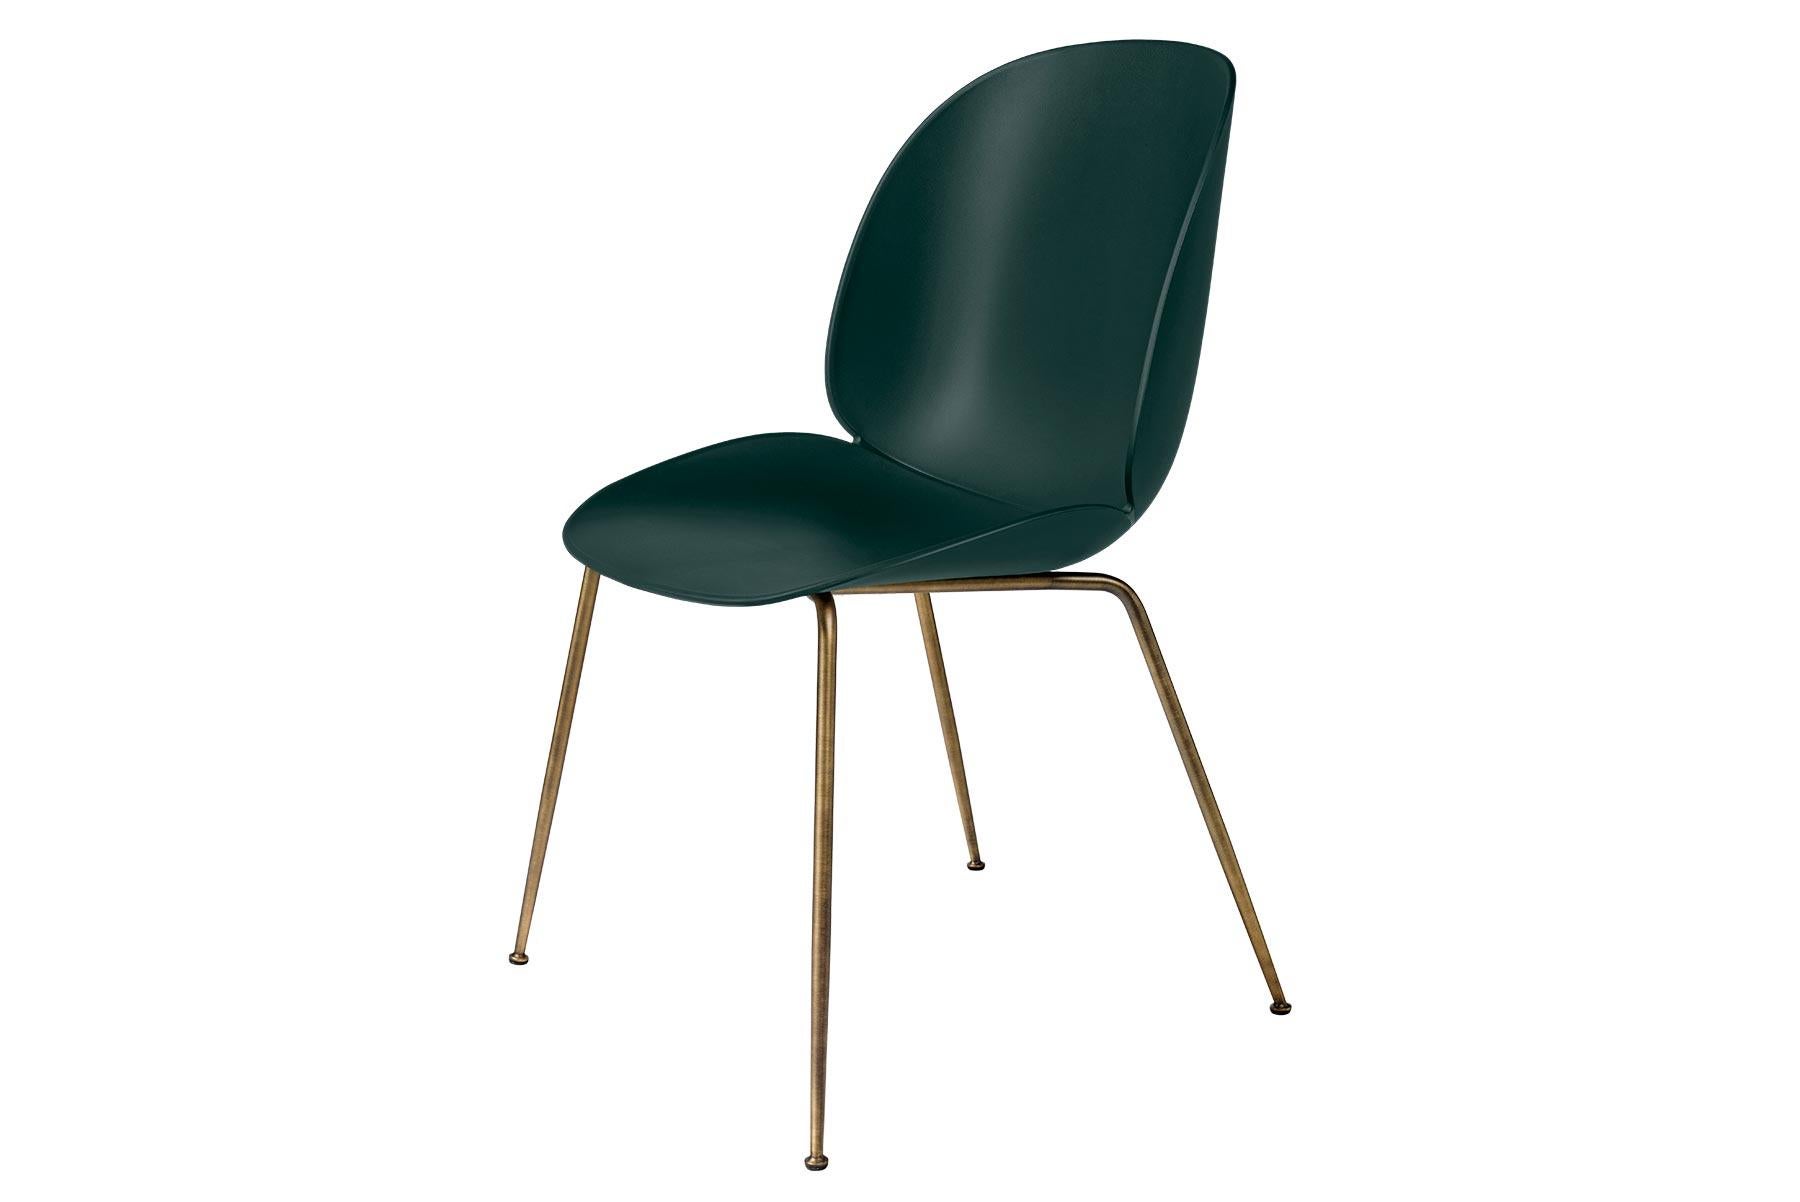 With the introduction of the un-upholstered Beetle chair, the collection has bloomed into a chair series with unlimited possibilities. The Beetle chair is no longer only an upholstered chair but also available with a polypropylene plastic shell,